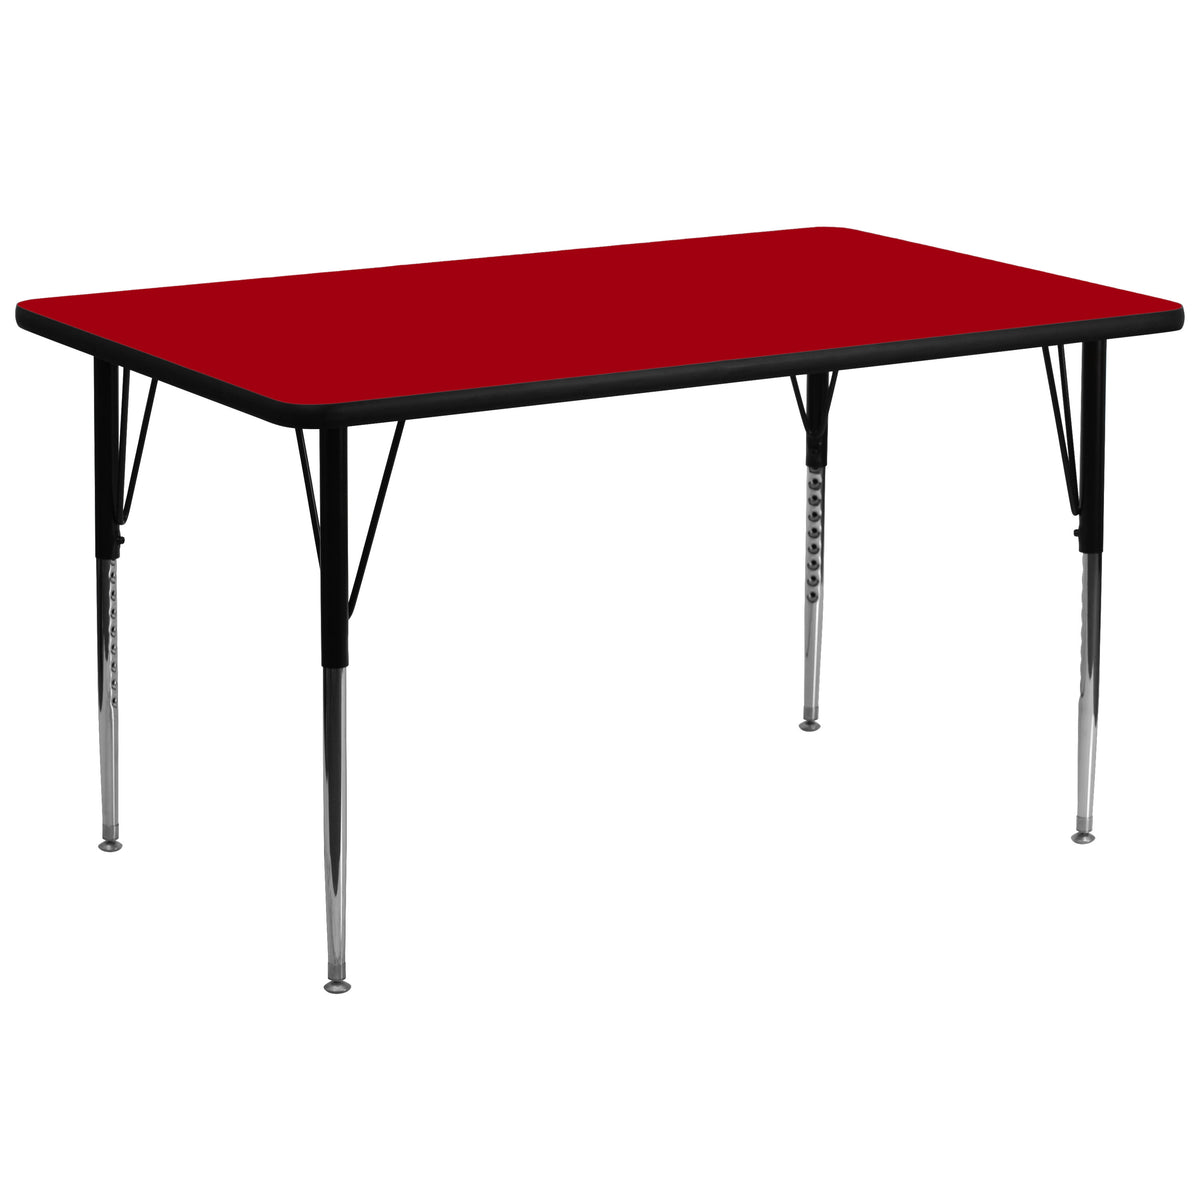 Red |#| 30inchW x 72inchL Rectangular Red Thermal Laminate Adjustable Activity Table